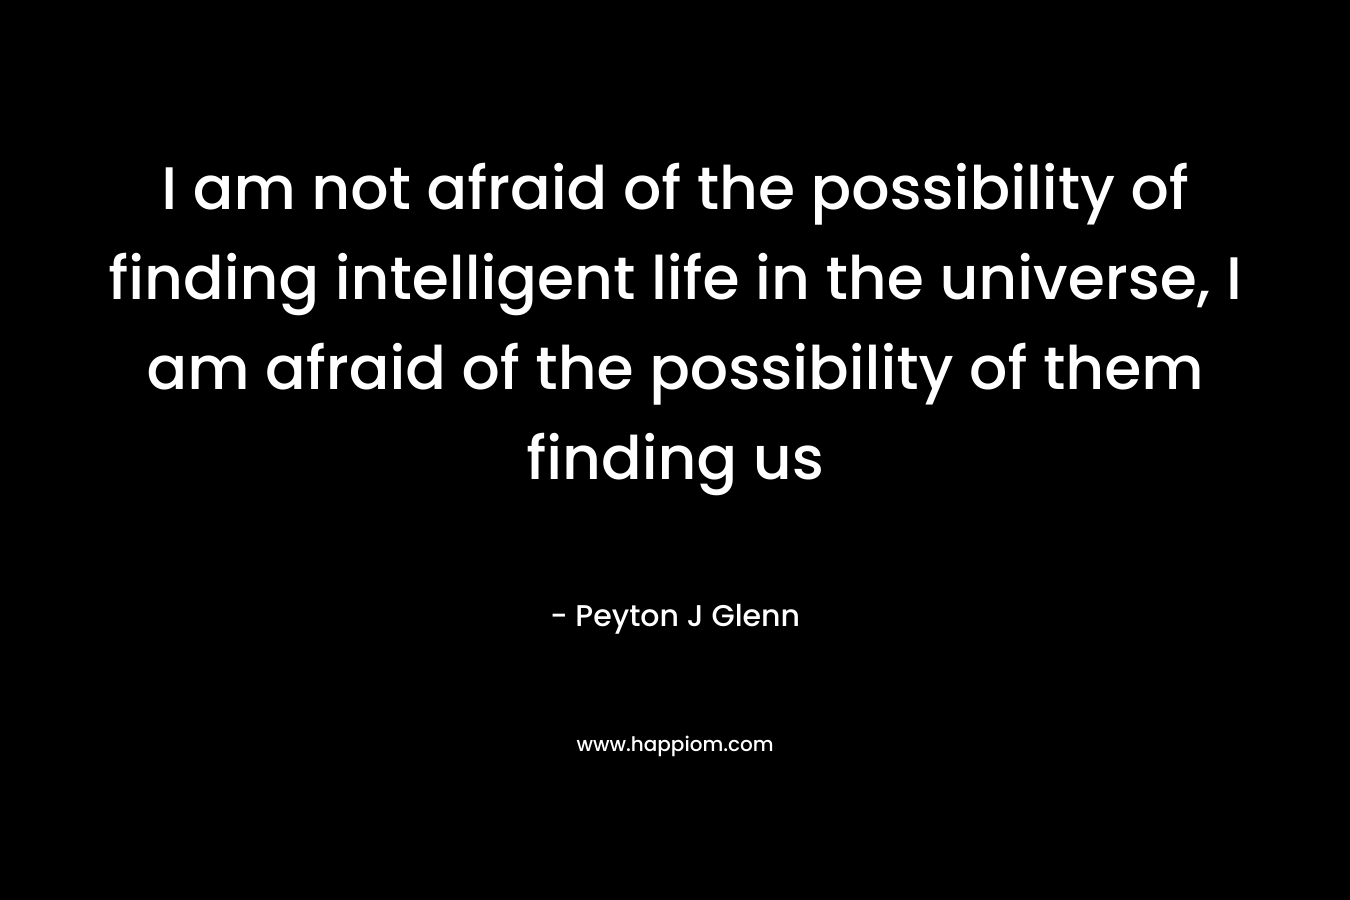 I am not afraid of the possibility of finding intelligent life in the universe, I am afraid of the possibility of them finding us